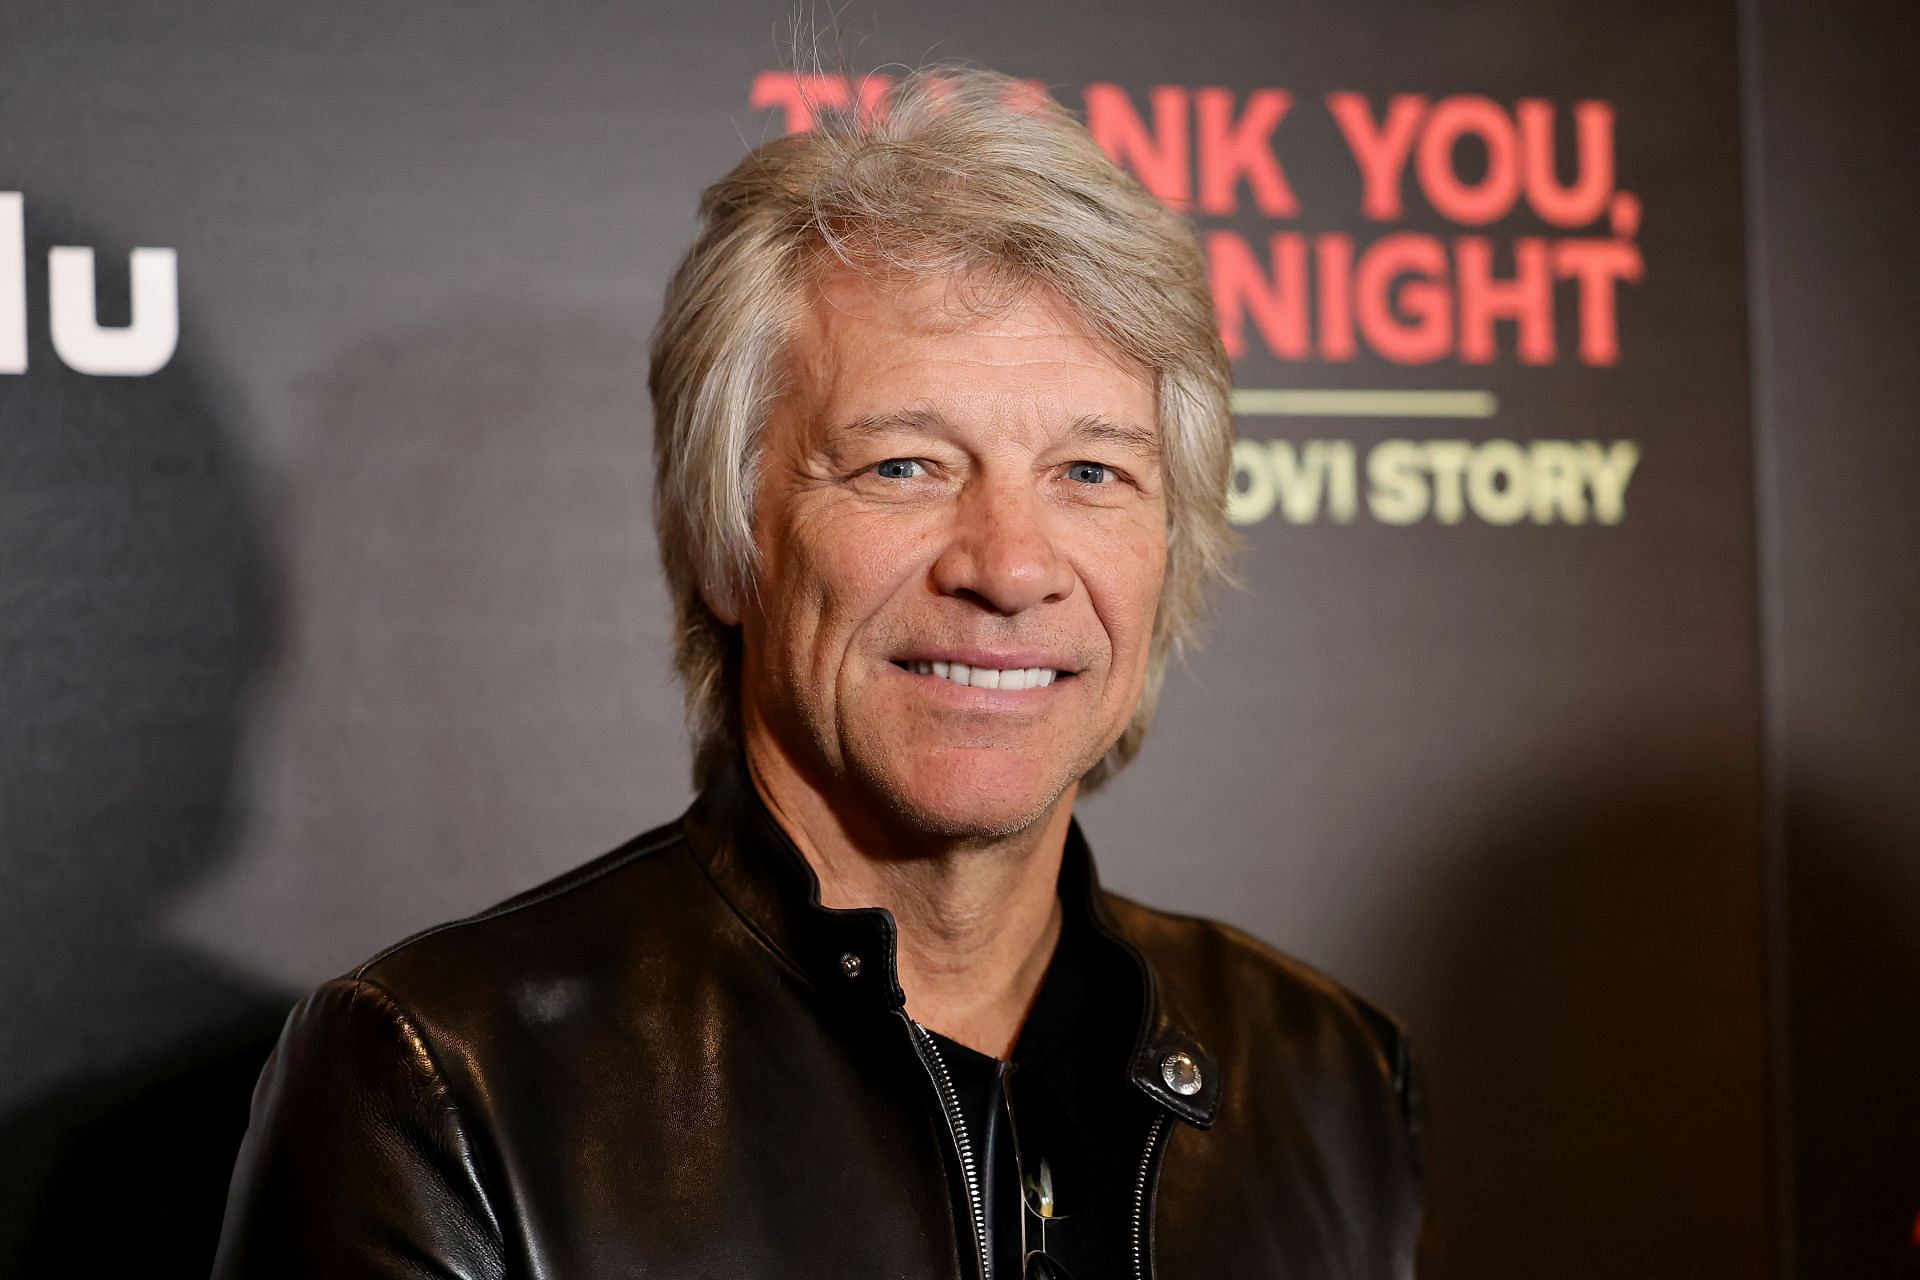 "I got away with murder"— Jon Bon Jovi opens up about not being a saint in his relationship over